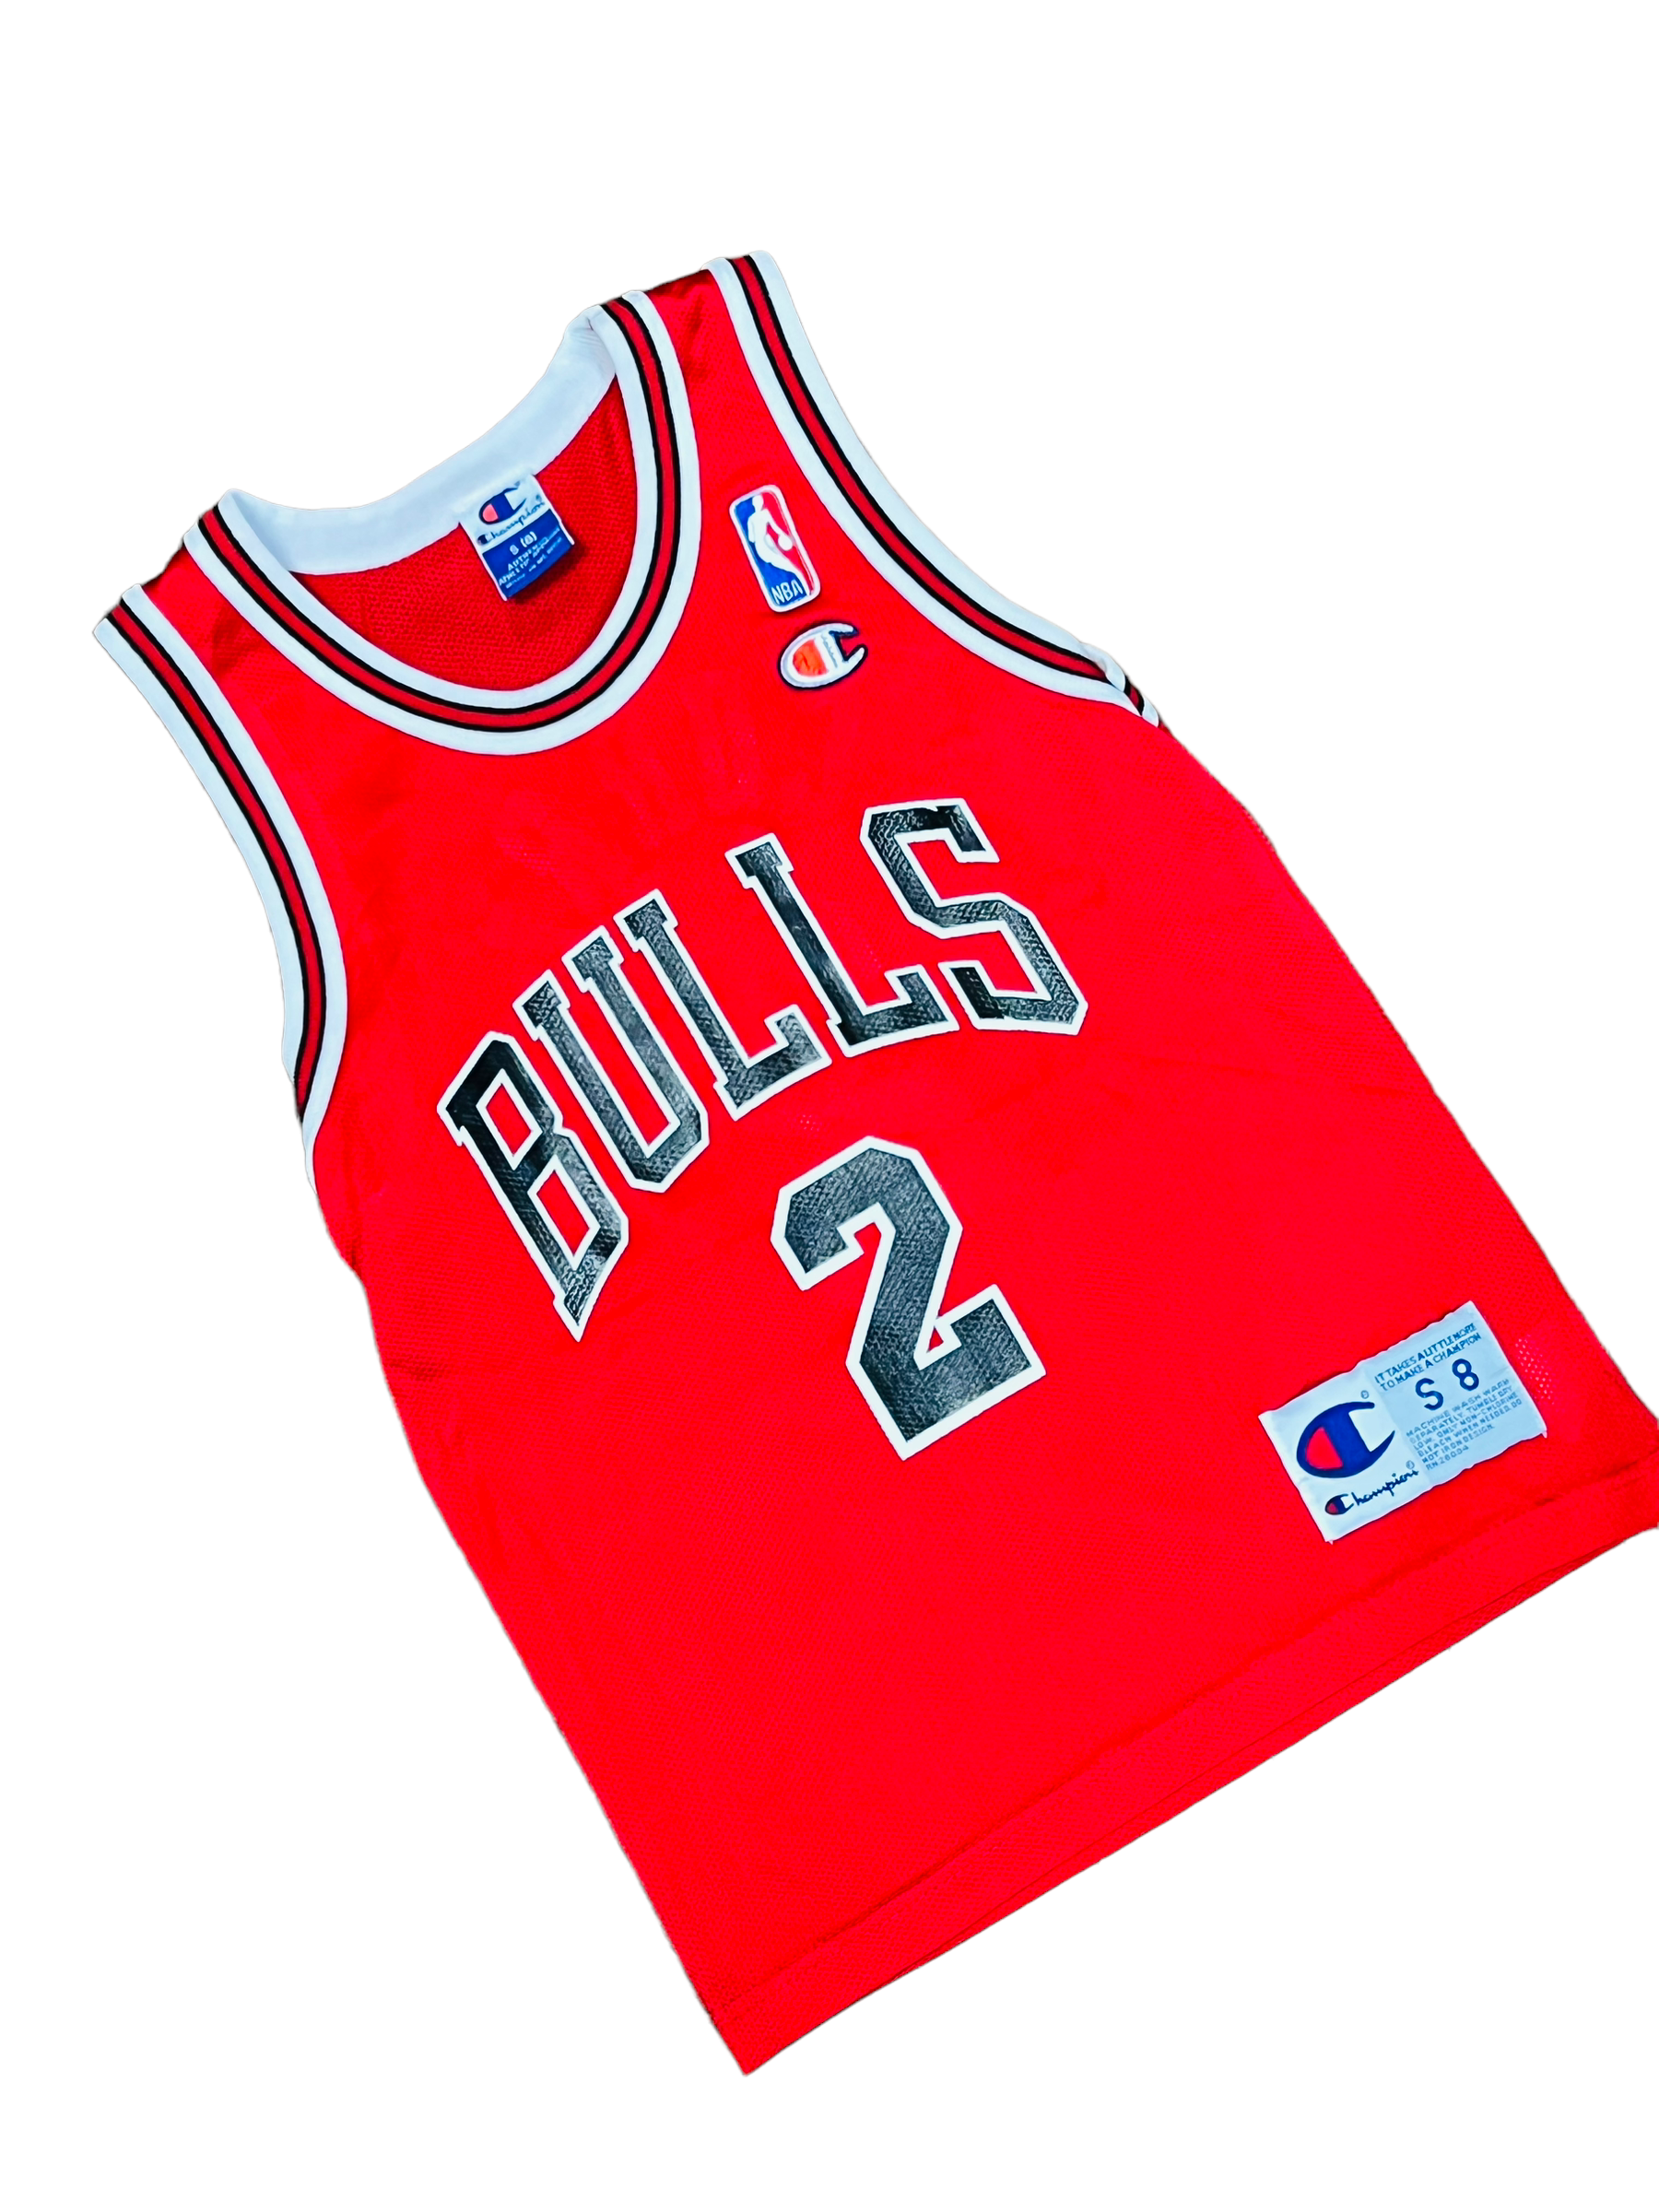 EDDIE CURRY CHICAGO BULLS VINTAGE 2000'S CHAMPION JERSEY YOUTH